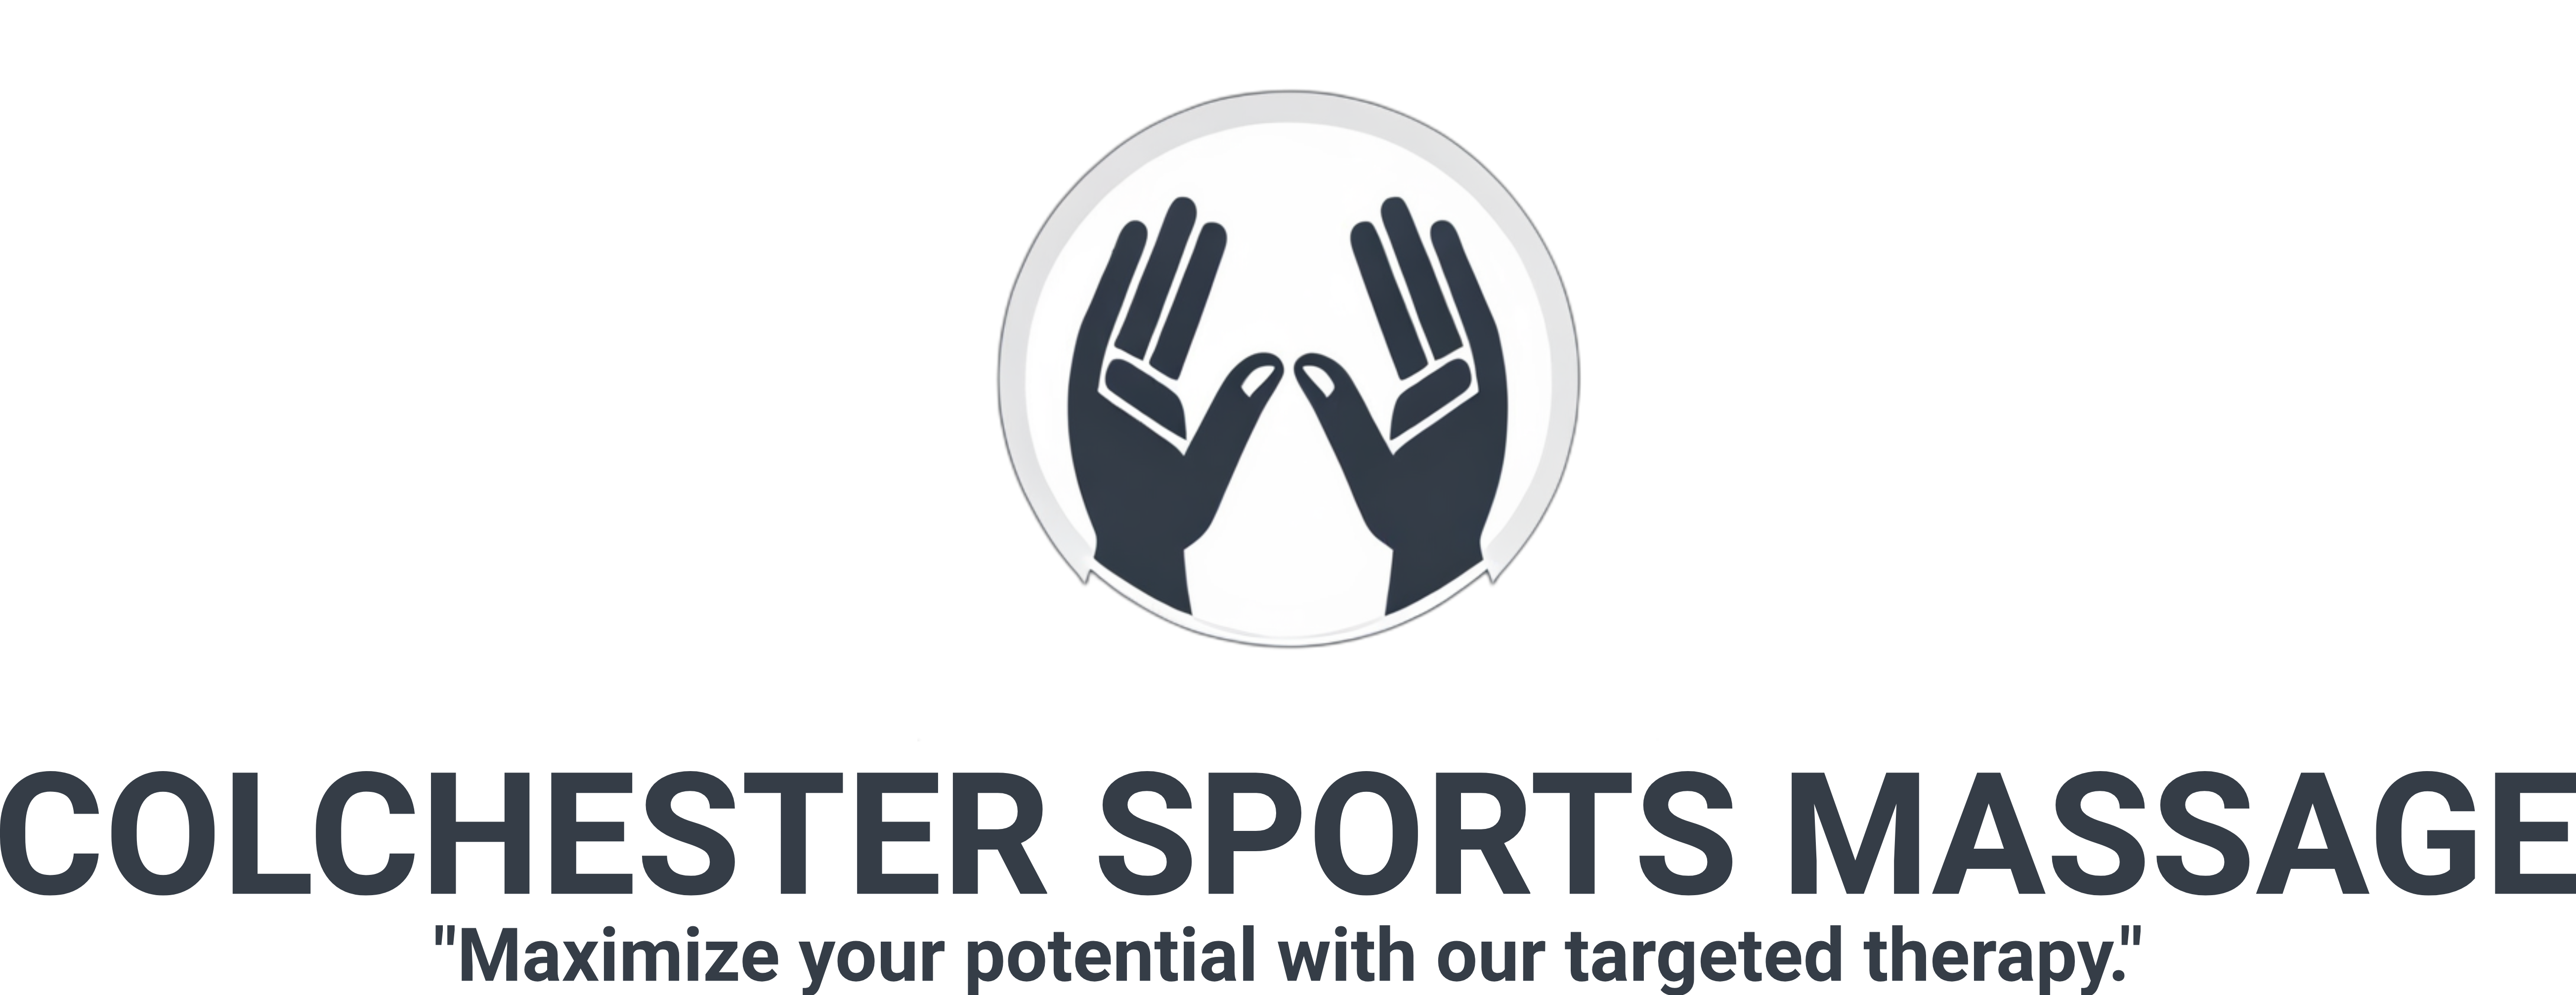 Contact - Colchester Sports Massage